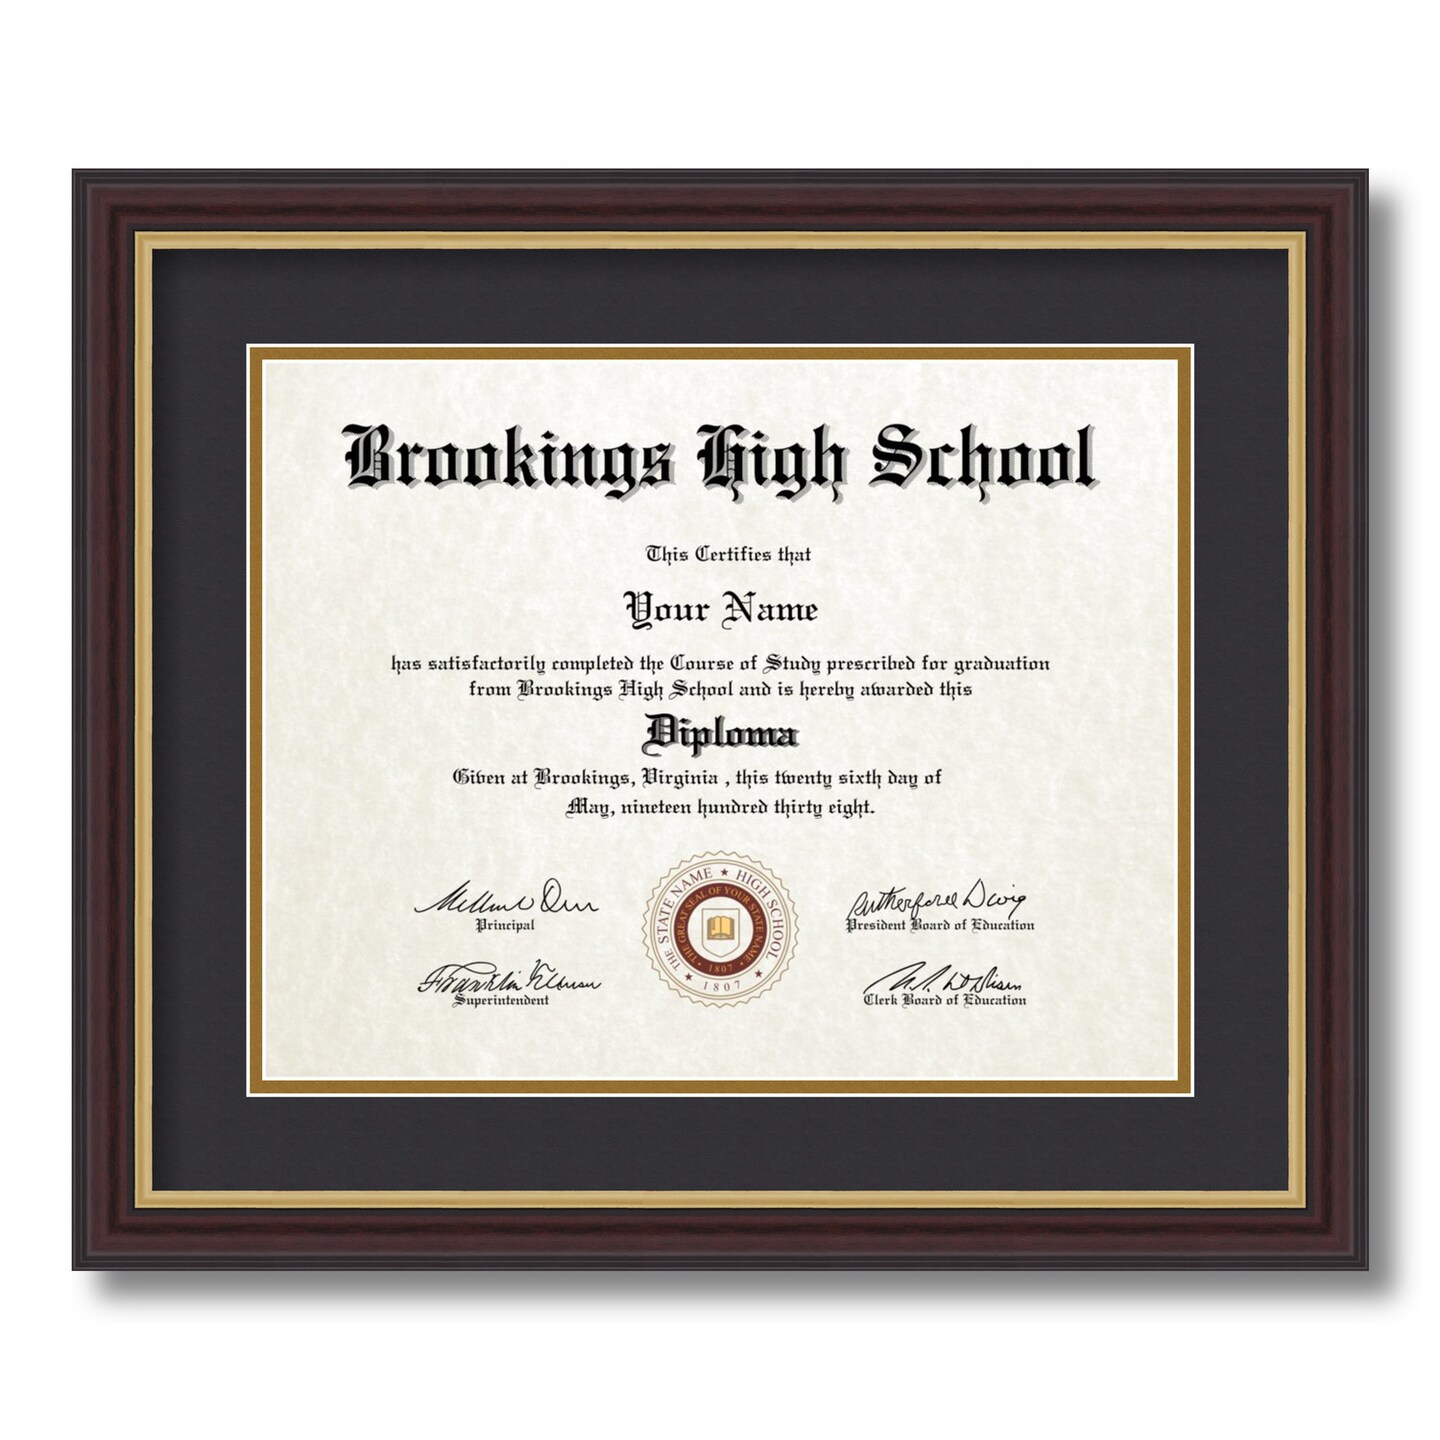 ArtToFrames 11x14 inch Diploma Frame - Framed with Black and Gold Mats, Comes with Regular Glass and Sawtooth Hanger for Wall Hanging (D-11x14)